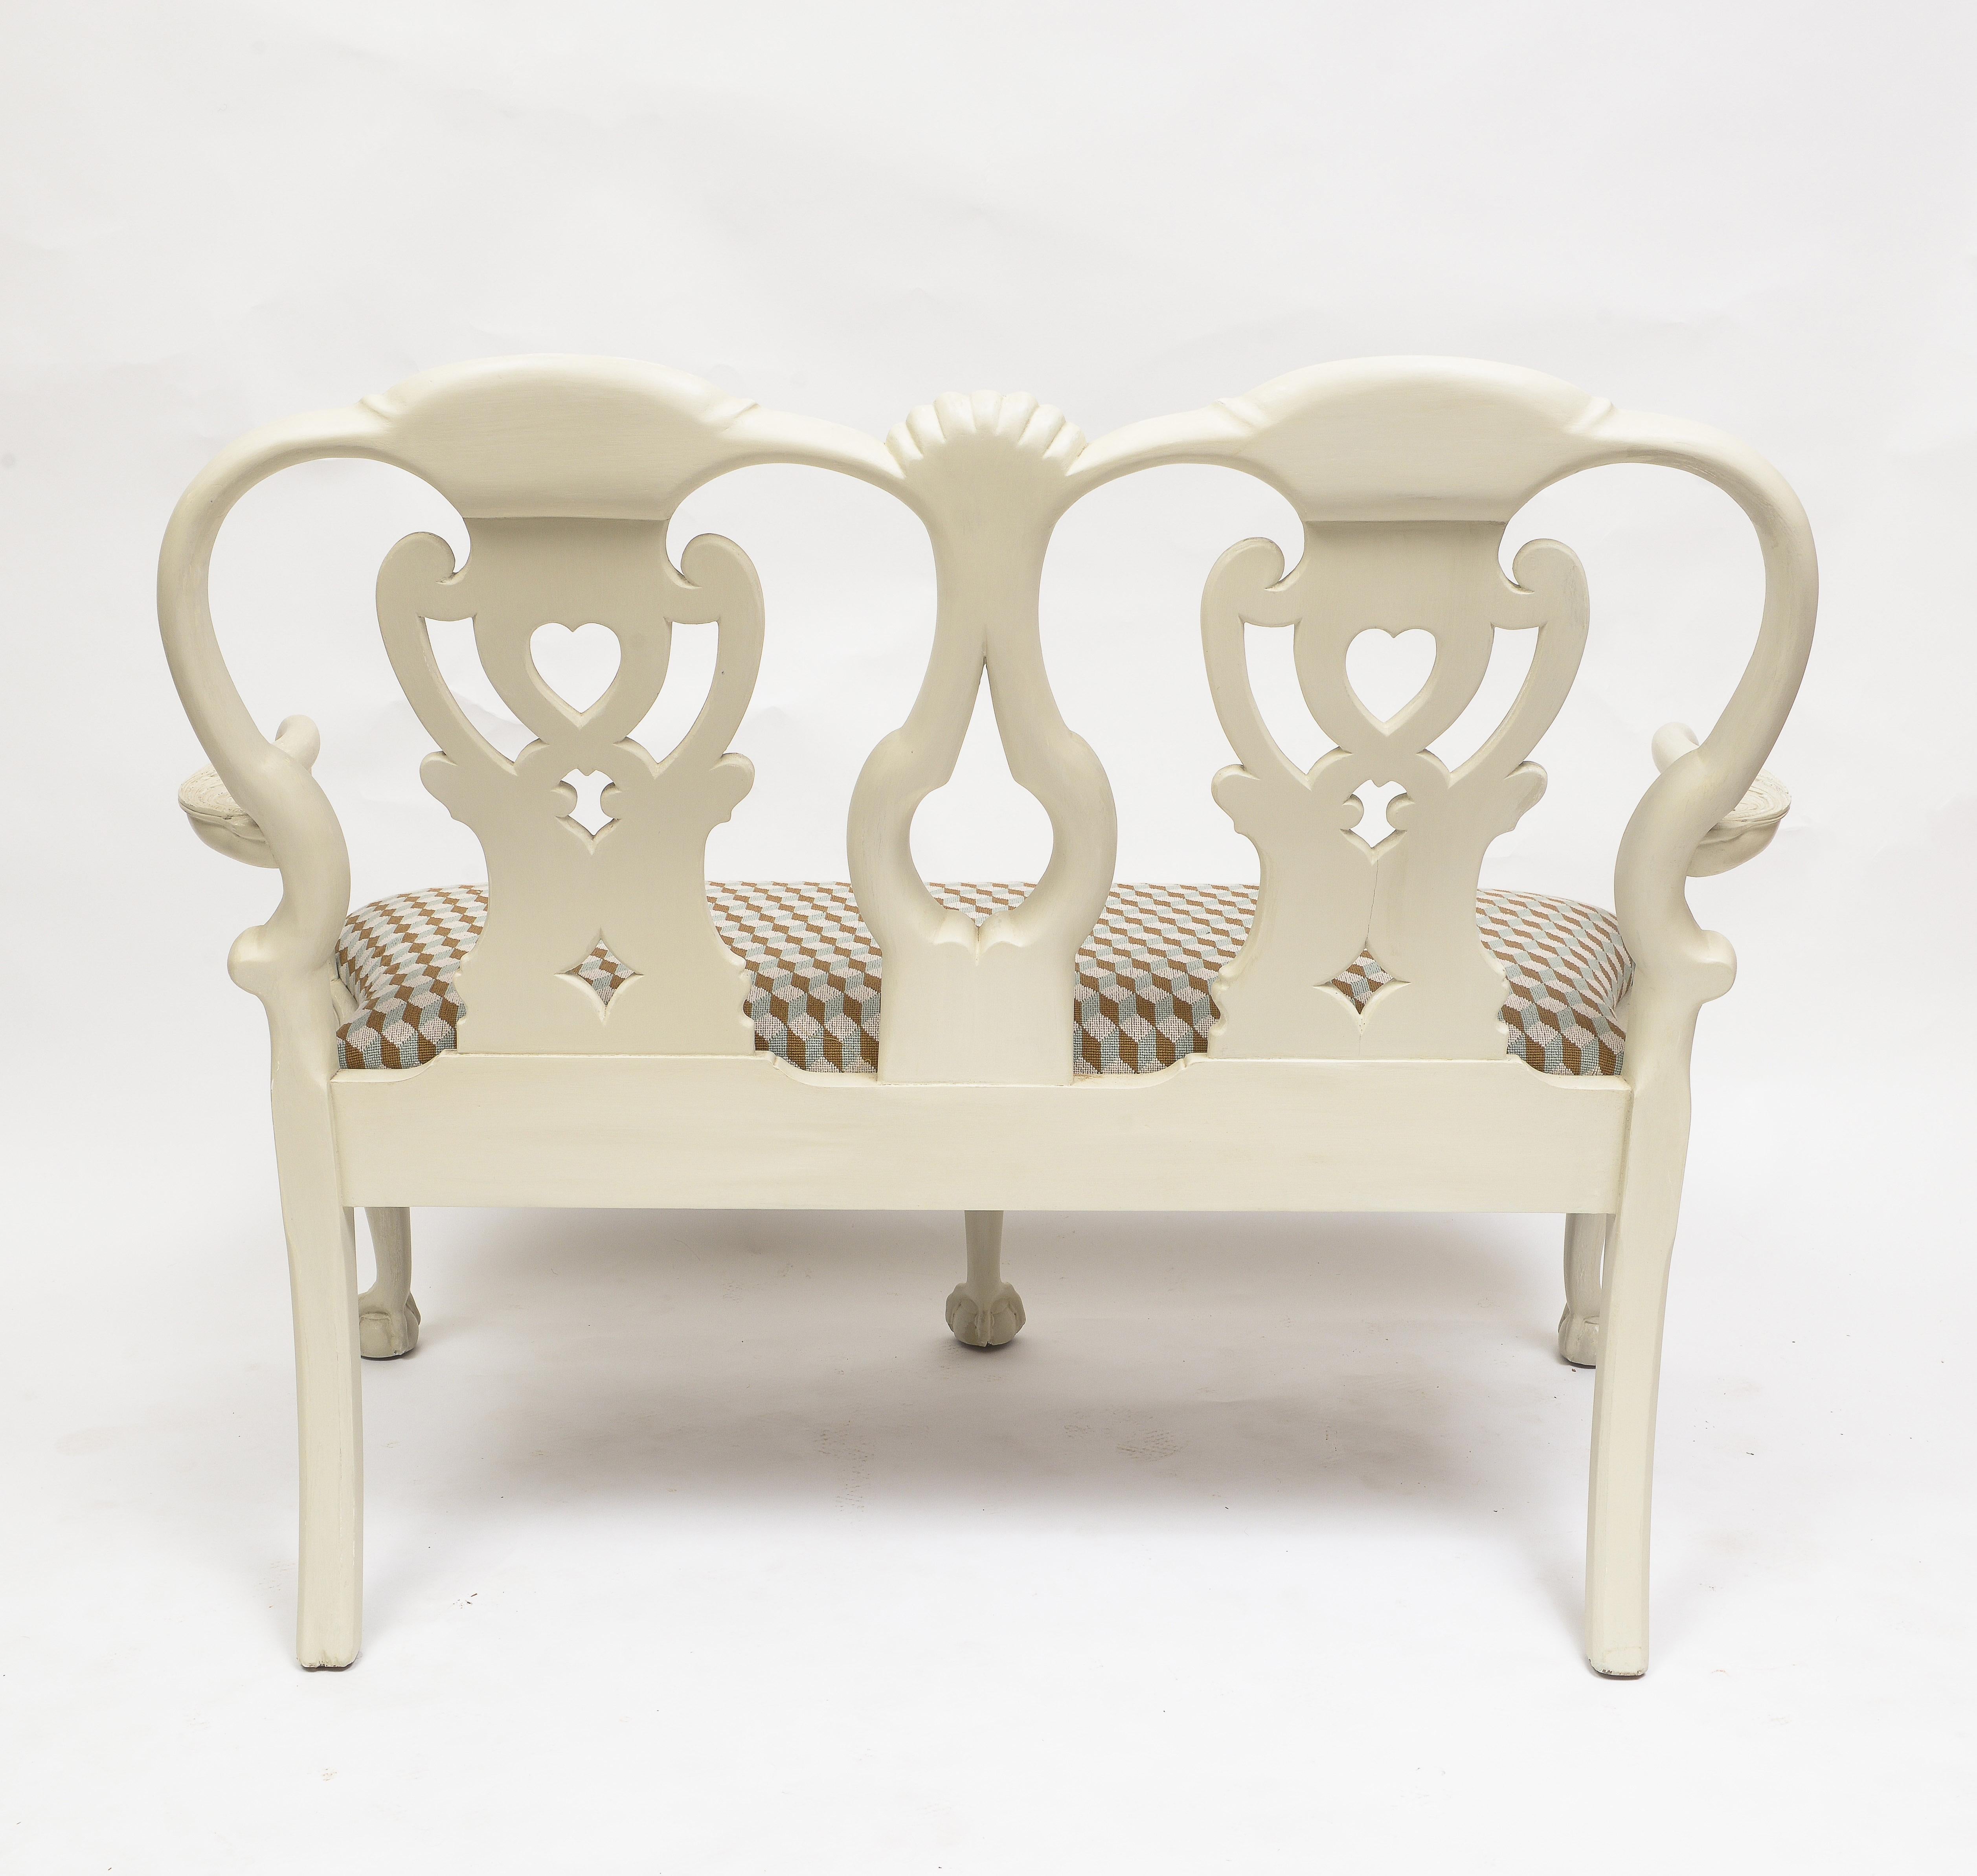 British 1990s Two Chair-Back Painted Settee For Sale